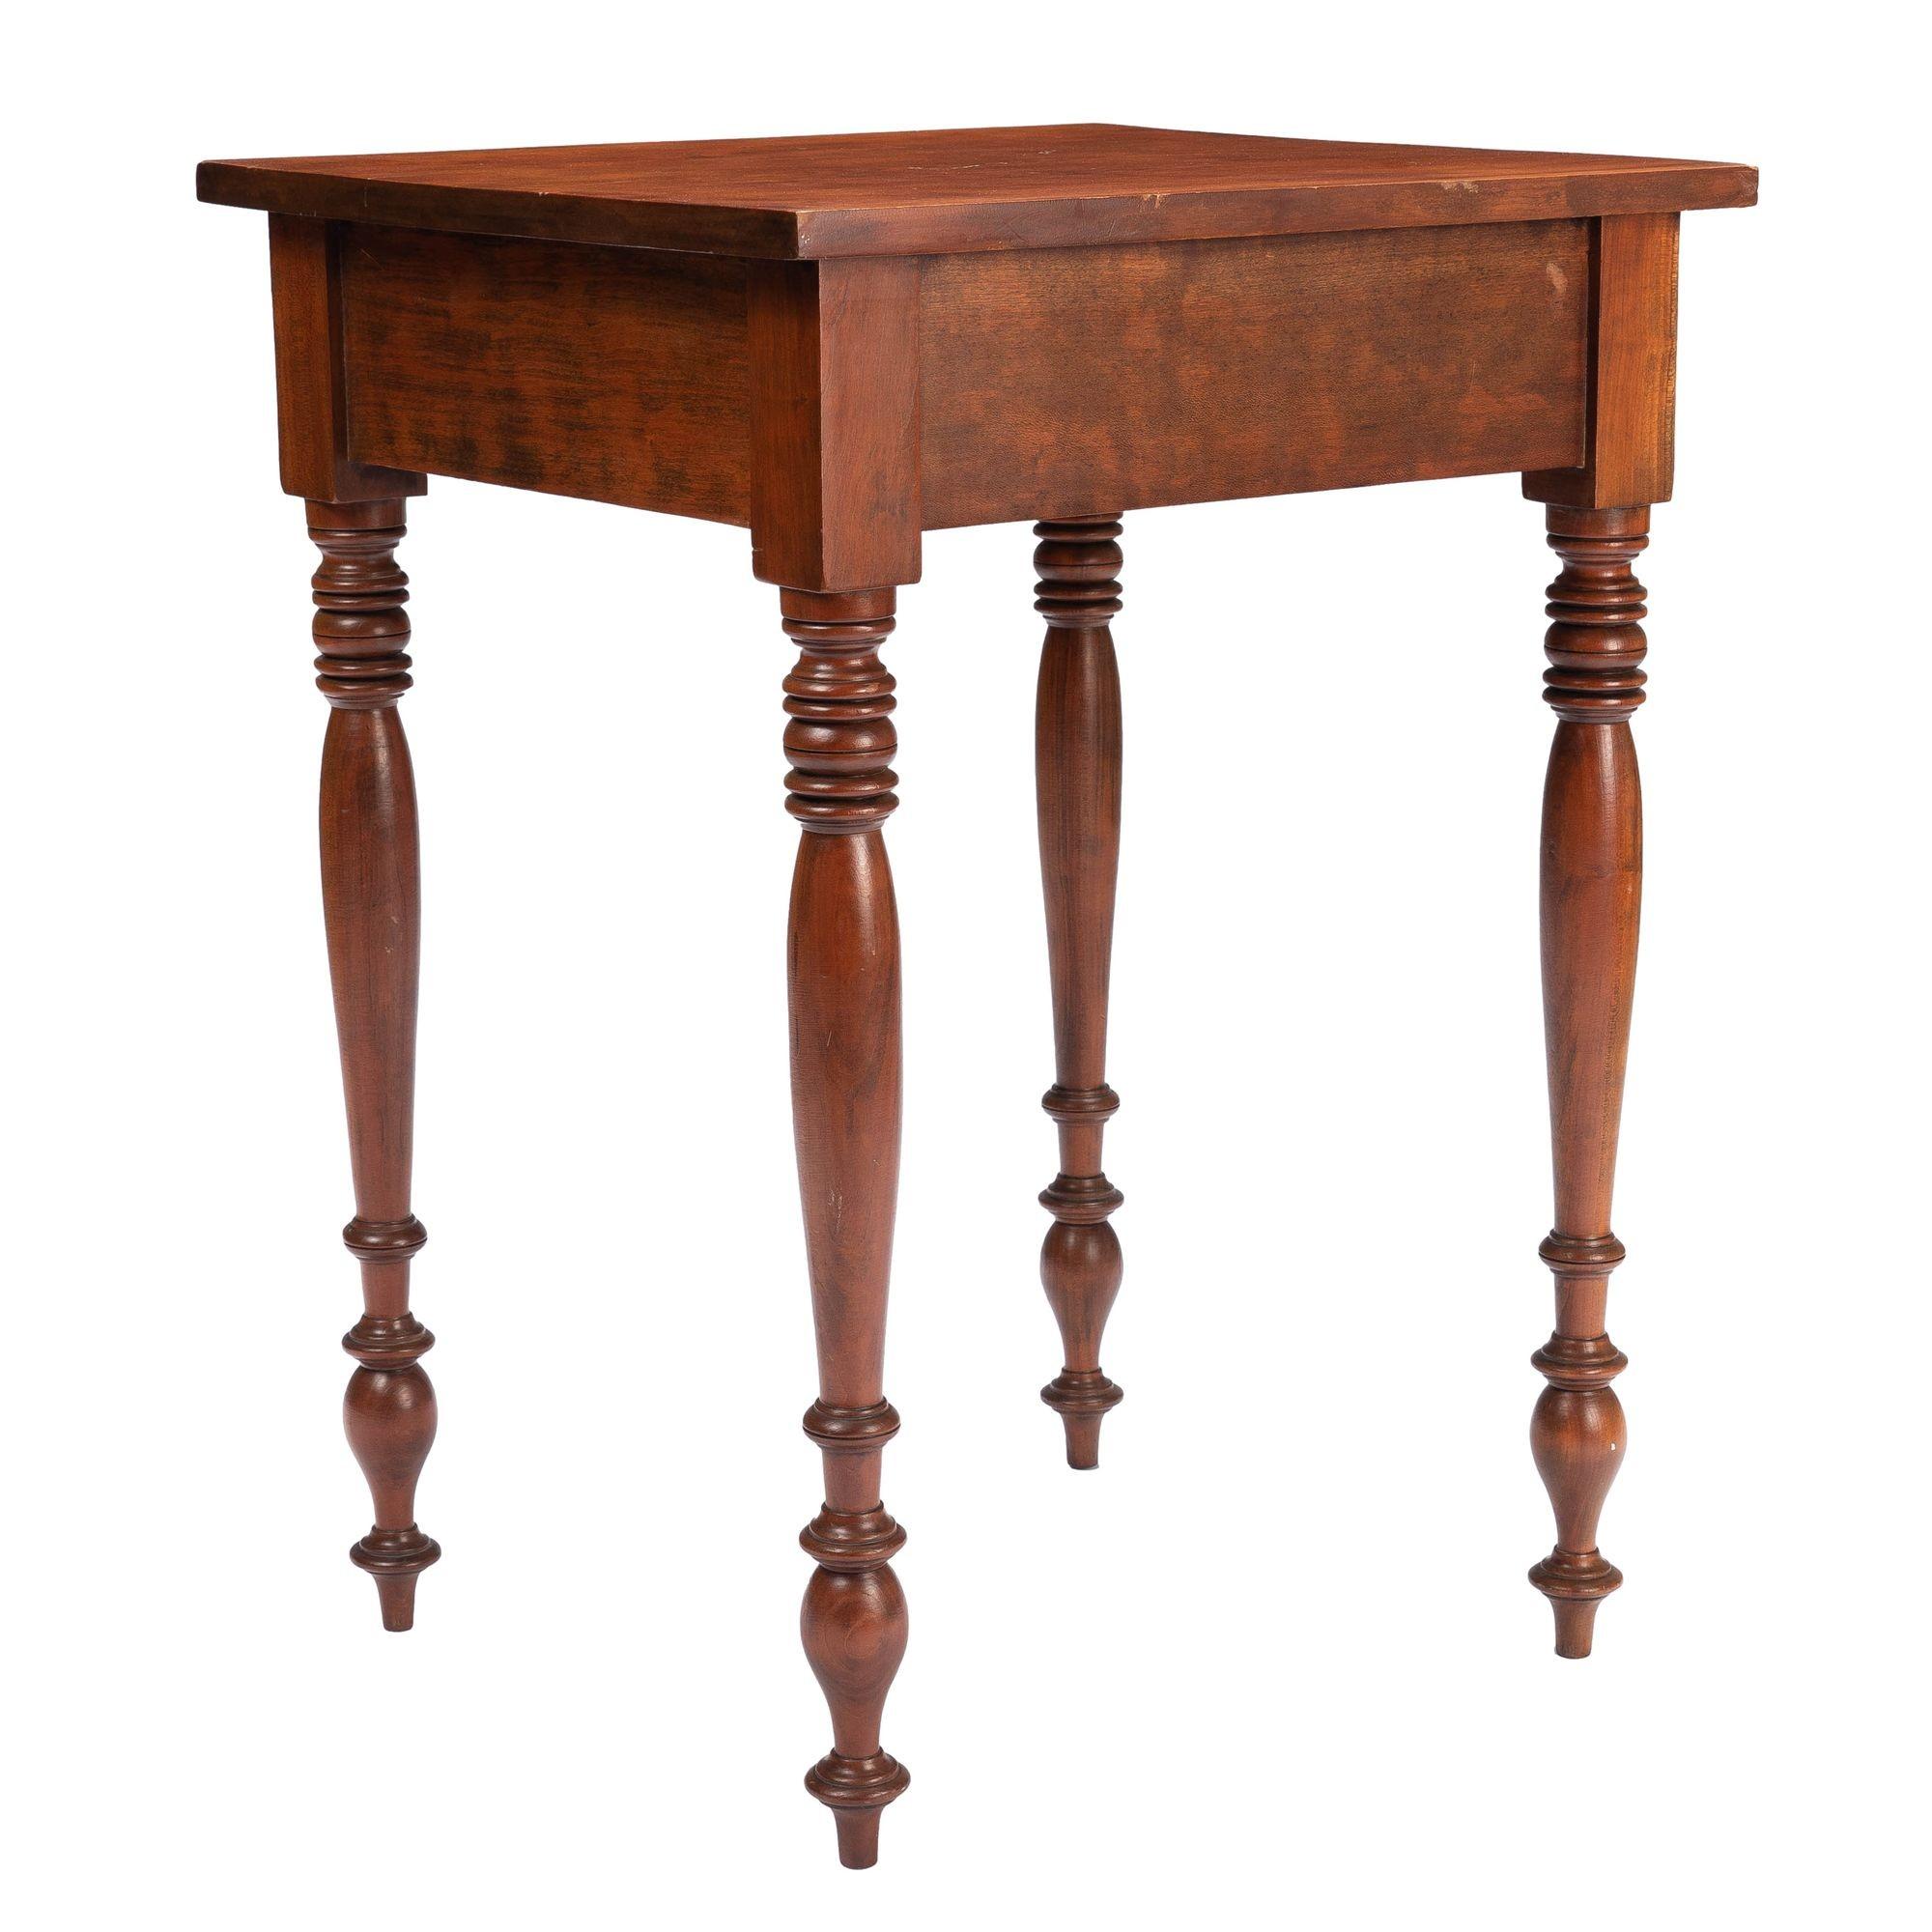 19th Century American Sheraton Curly Cherry Wood One Drawer Stand, 1820 For Sale